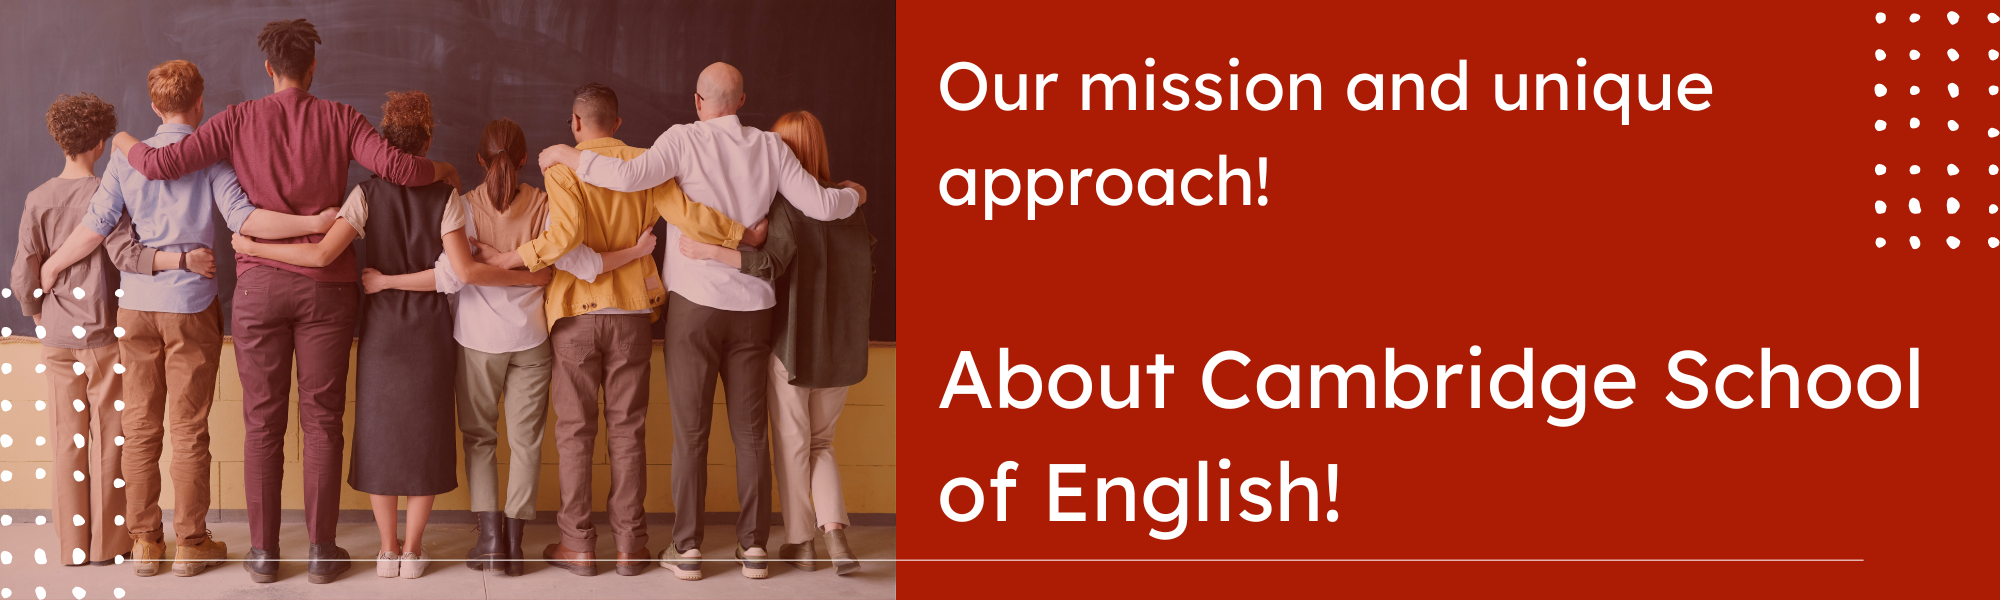 Our approach, English